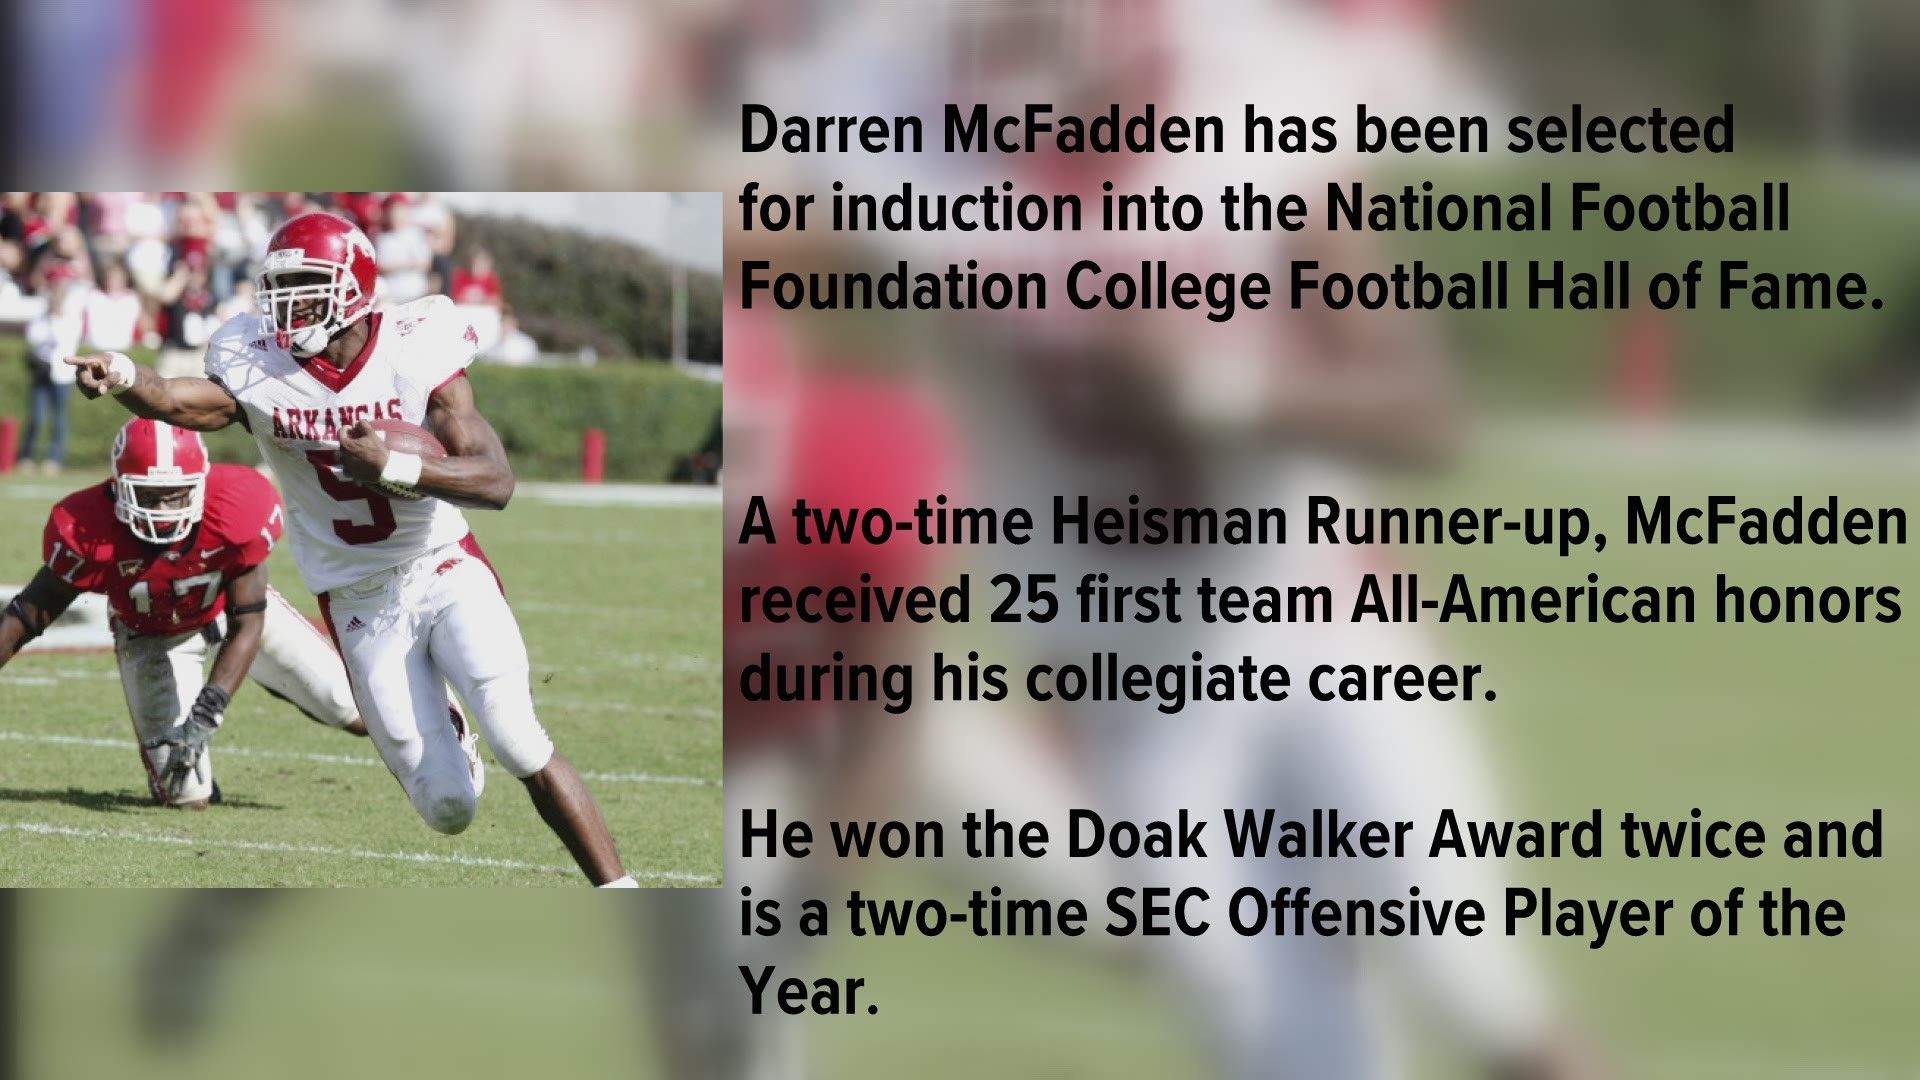 Darren McFadden has been selected for induction into the national football foundation college football hall of fame.